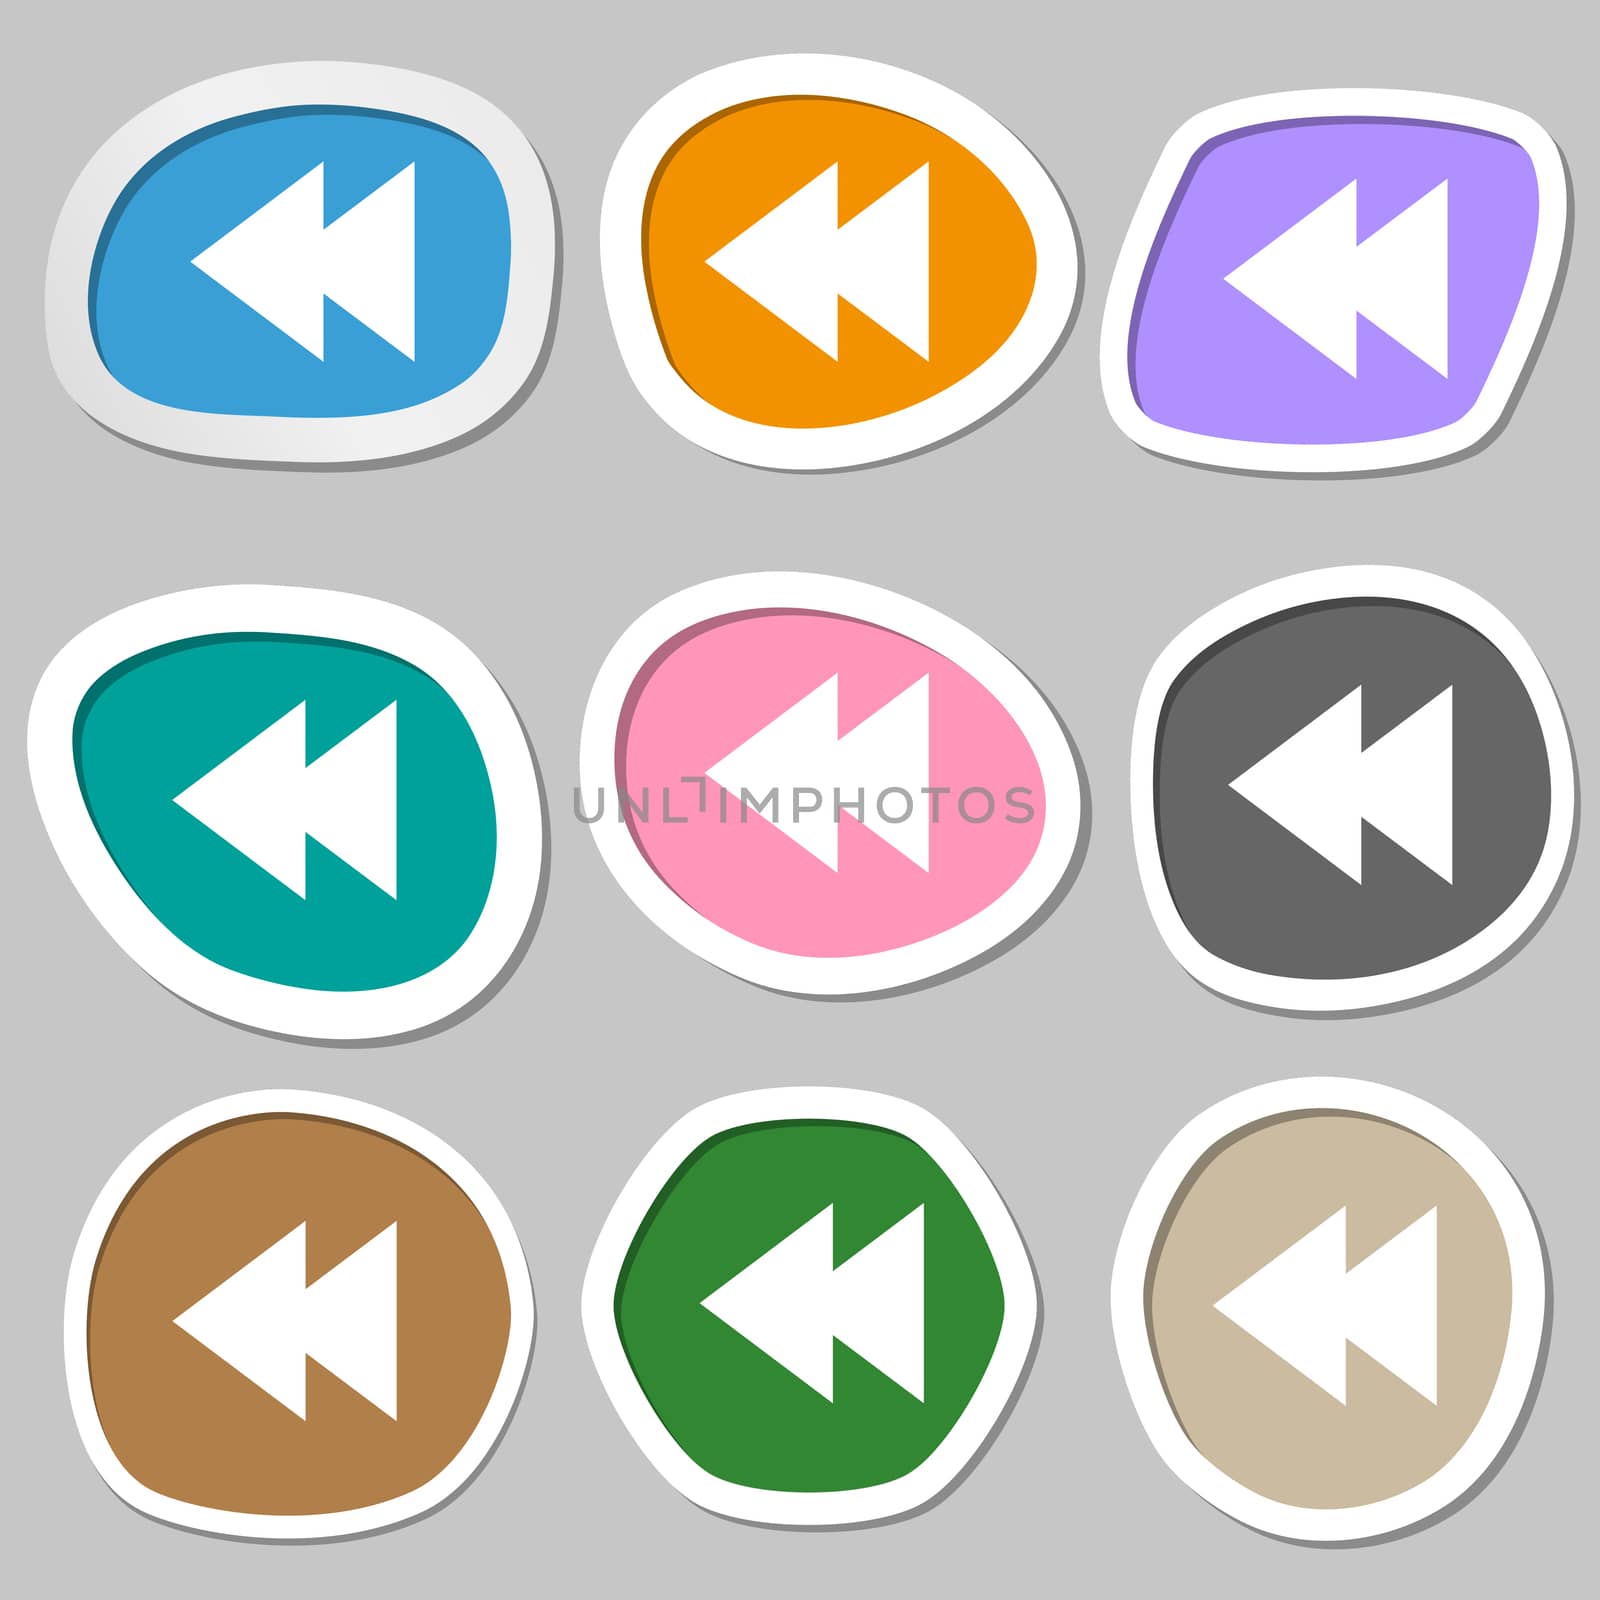 multimedia sign icon. Player navigation symbol. Multicolored paper stickers. illustration